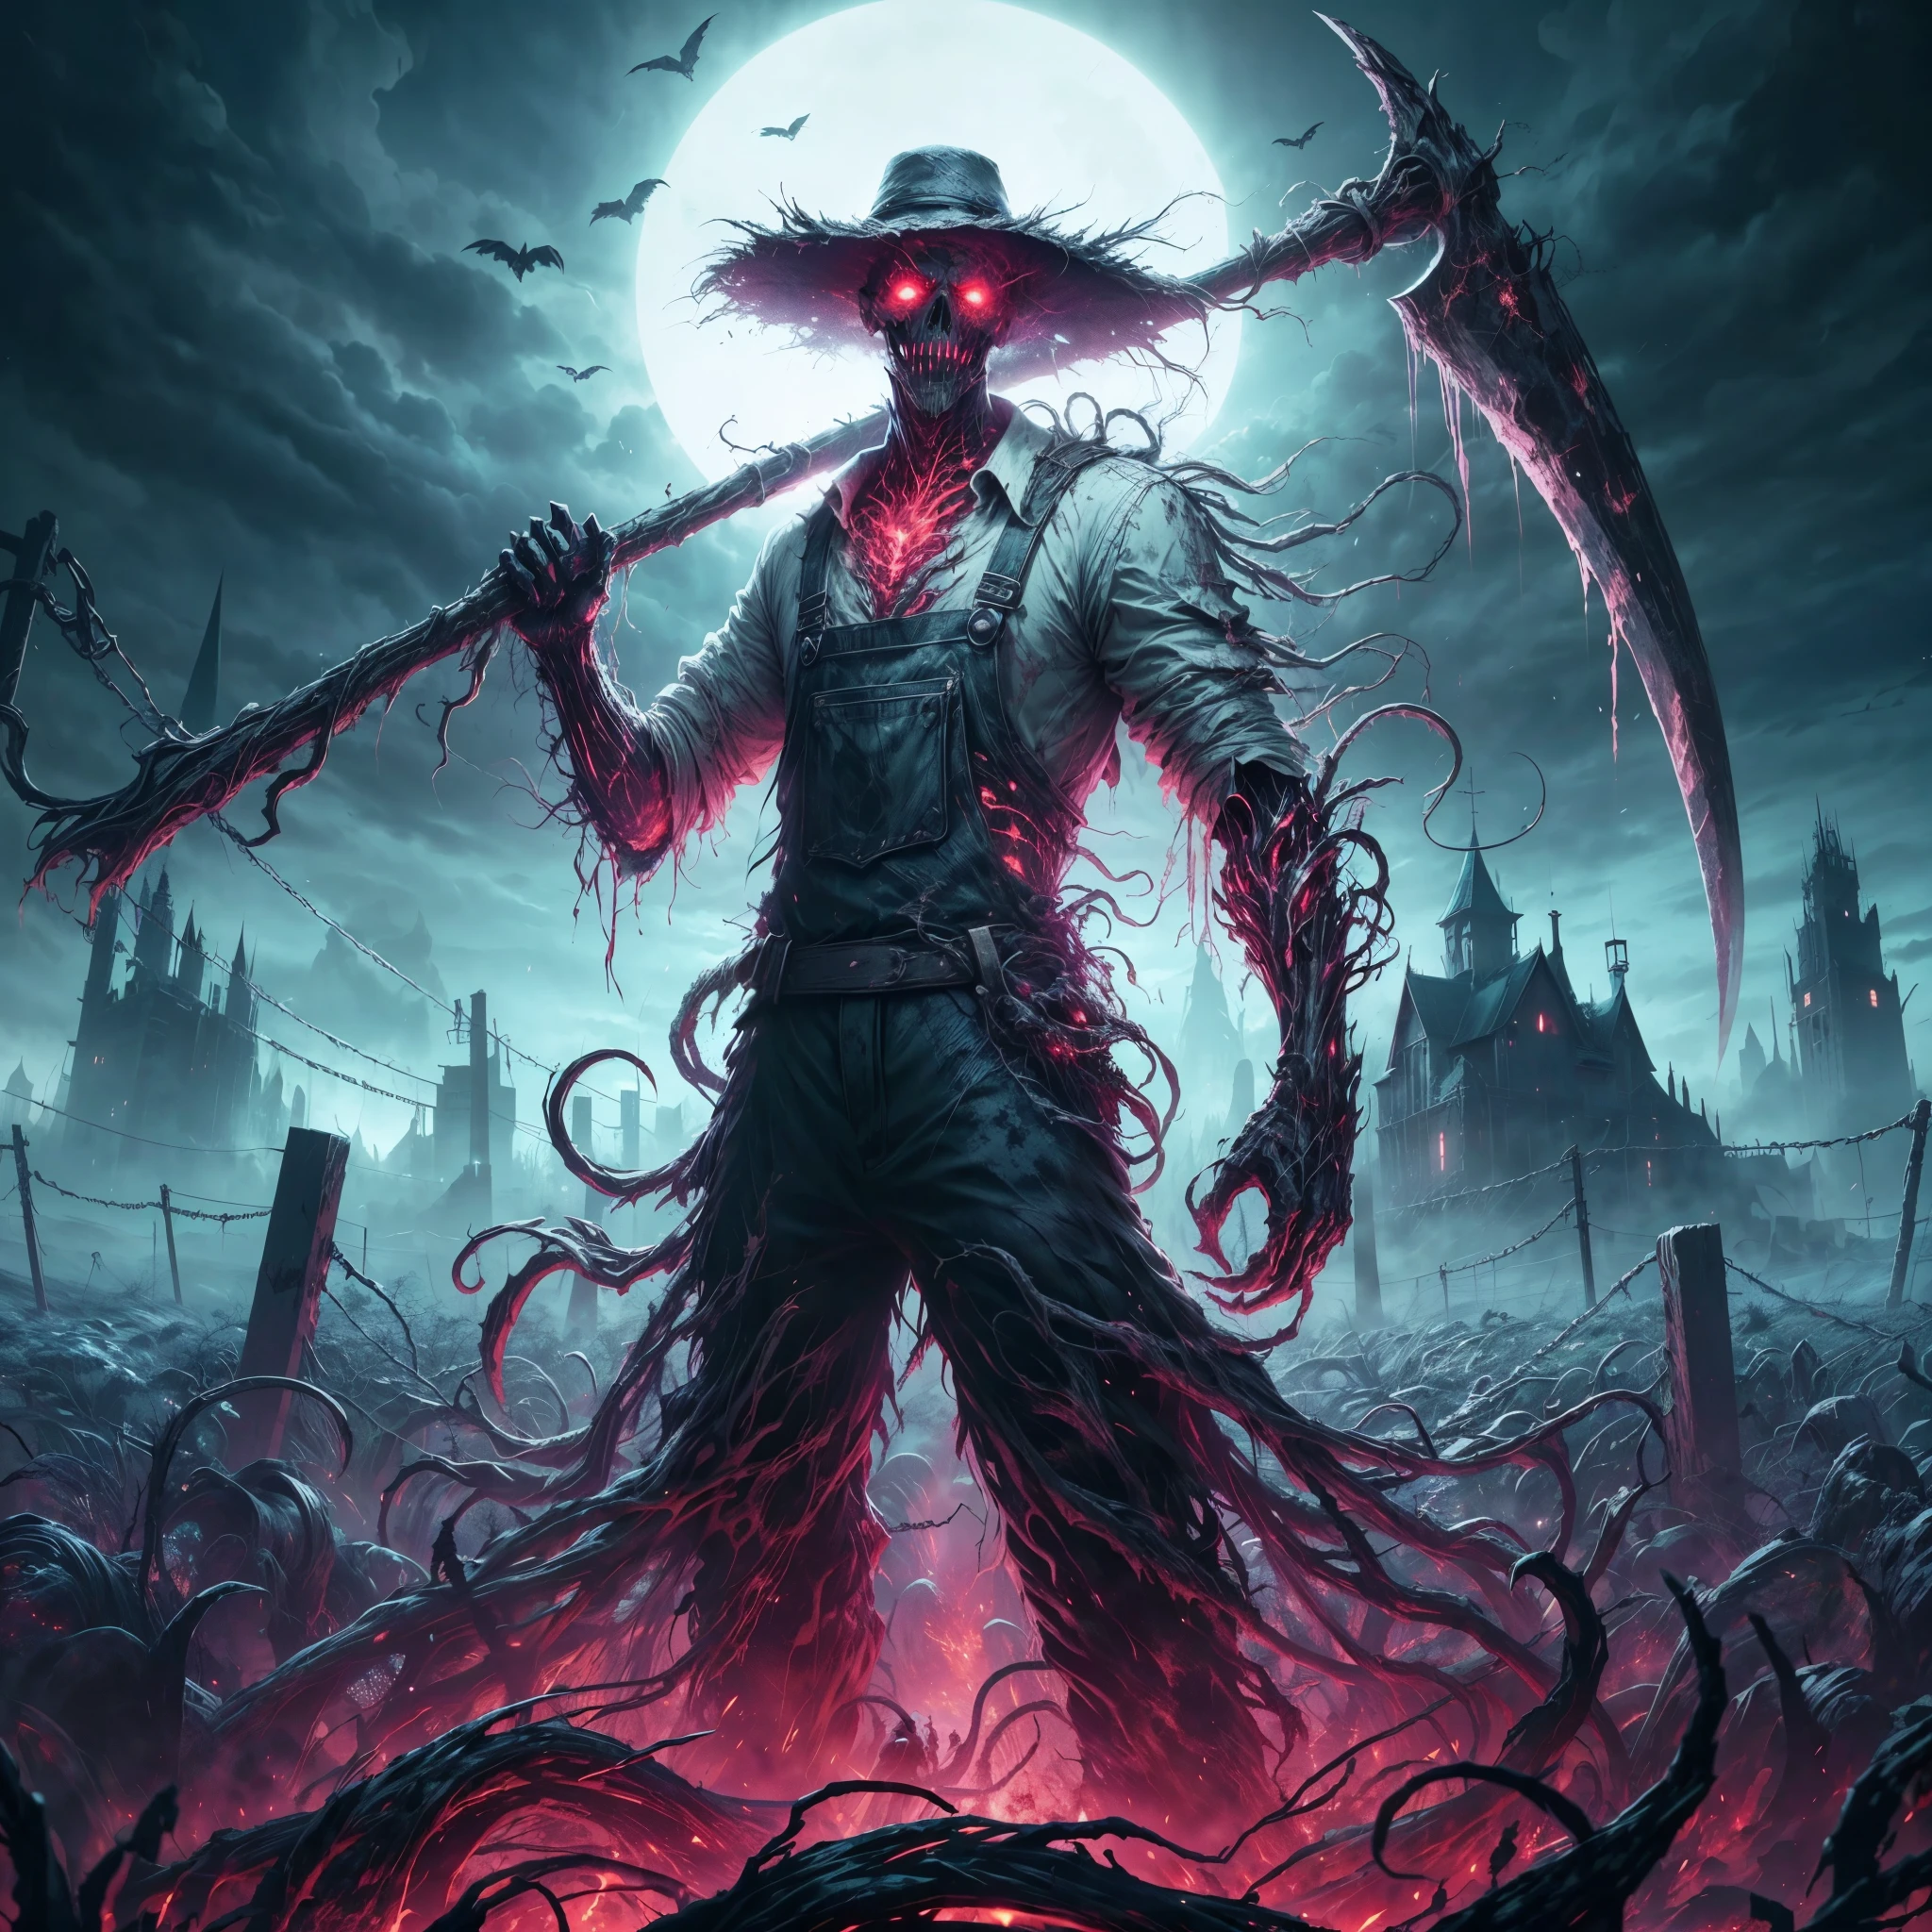 (best quality,4k,8k,highres,masterpiece:1.2),ultra-detailed,realistic:1.37,dark soul boss style,Lovecraftian horror,haunted field background,sinister smile,scythe weapon,glowing red eyes,fantasy corrupted farmer outfit,energy cracking around body,battle aura,bloodstained,dynamic lighting,ominous atmosphere,grim and desolate,twisted trees,creepy fog,unsettling shadows,weathered scarecrows,distorted landscapes,haunting whispers,ominous sky,crumbling ruins,ominous storm brewing,lingering sense of darkness,ominous runes,shattered gravestones,mystery and suspense,brutal and intense,dread and fear,gothic elements,oppressive silence,menacing presence,horror-filled ambiance,dark and tormented souls,sinister energy,evoking a sense of doom,nightmare-infused reality